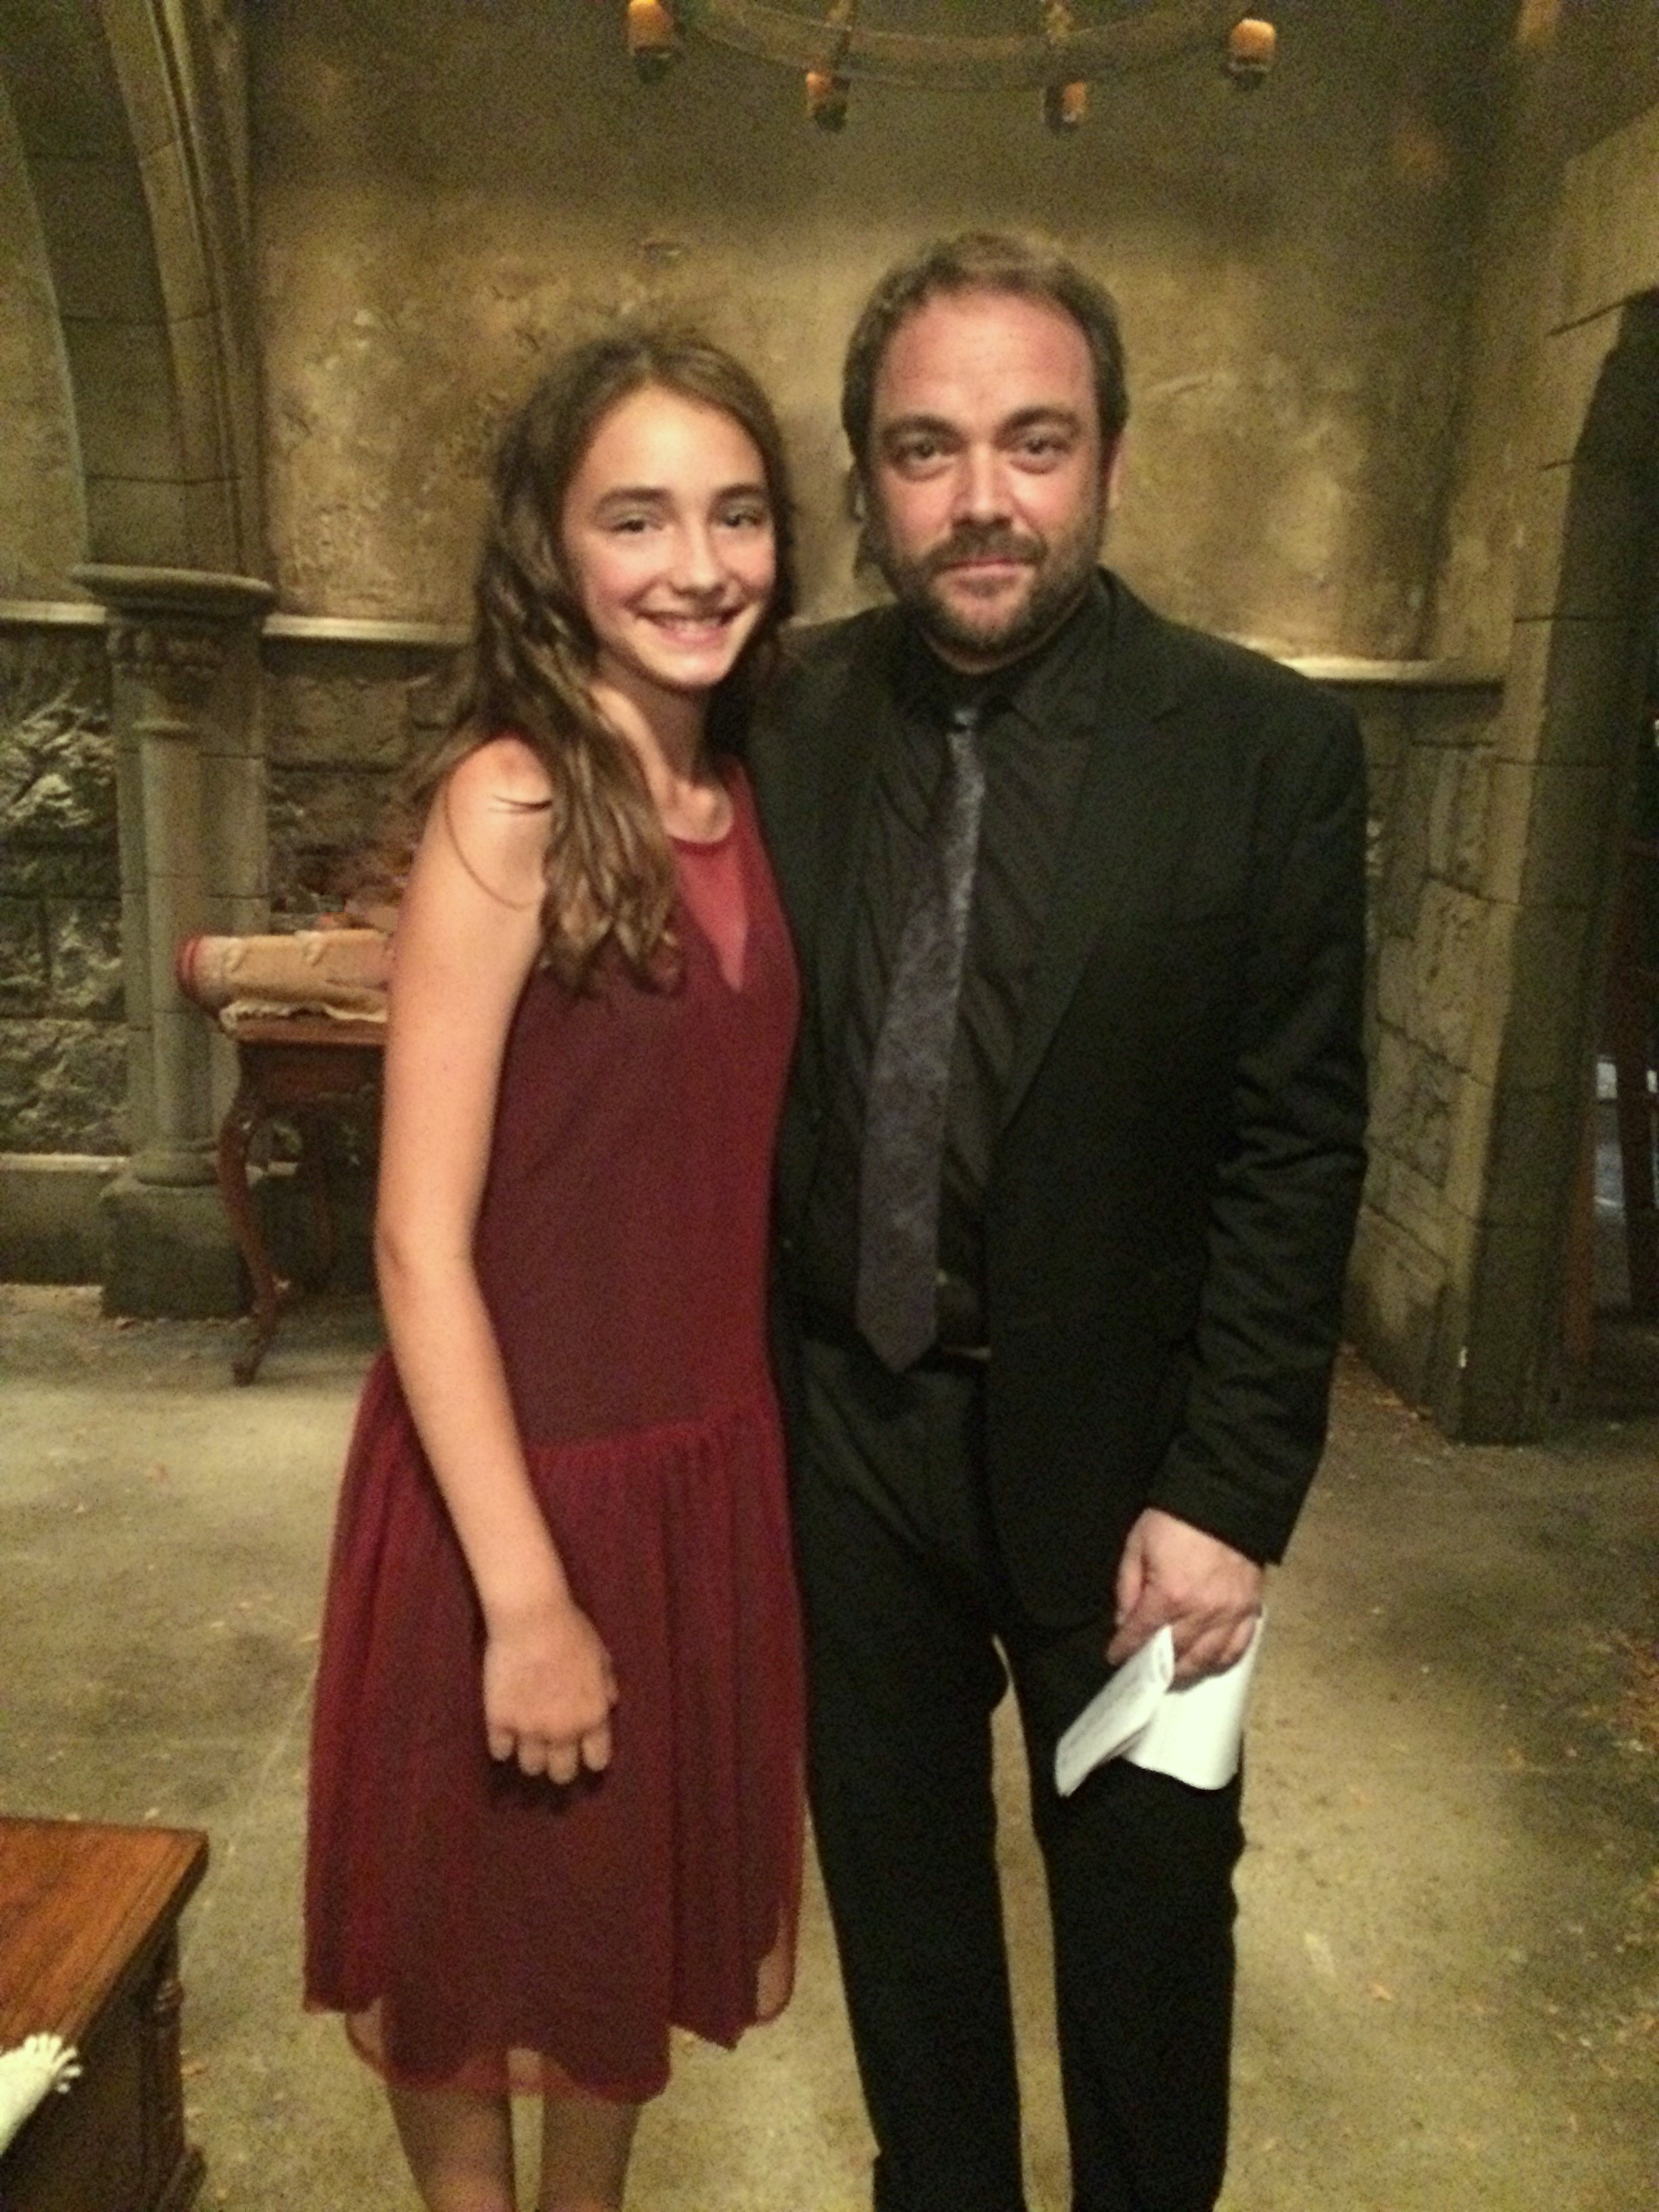 SUPERNATURAL (s.11/ep.3) The Bad Seed w/ Mark Sheppard